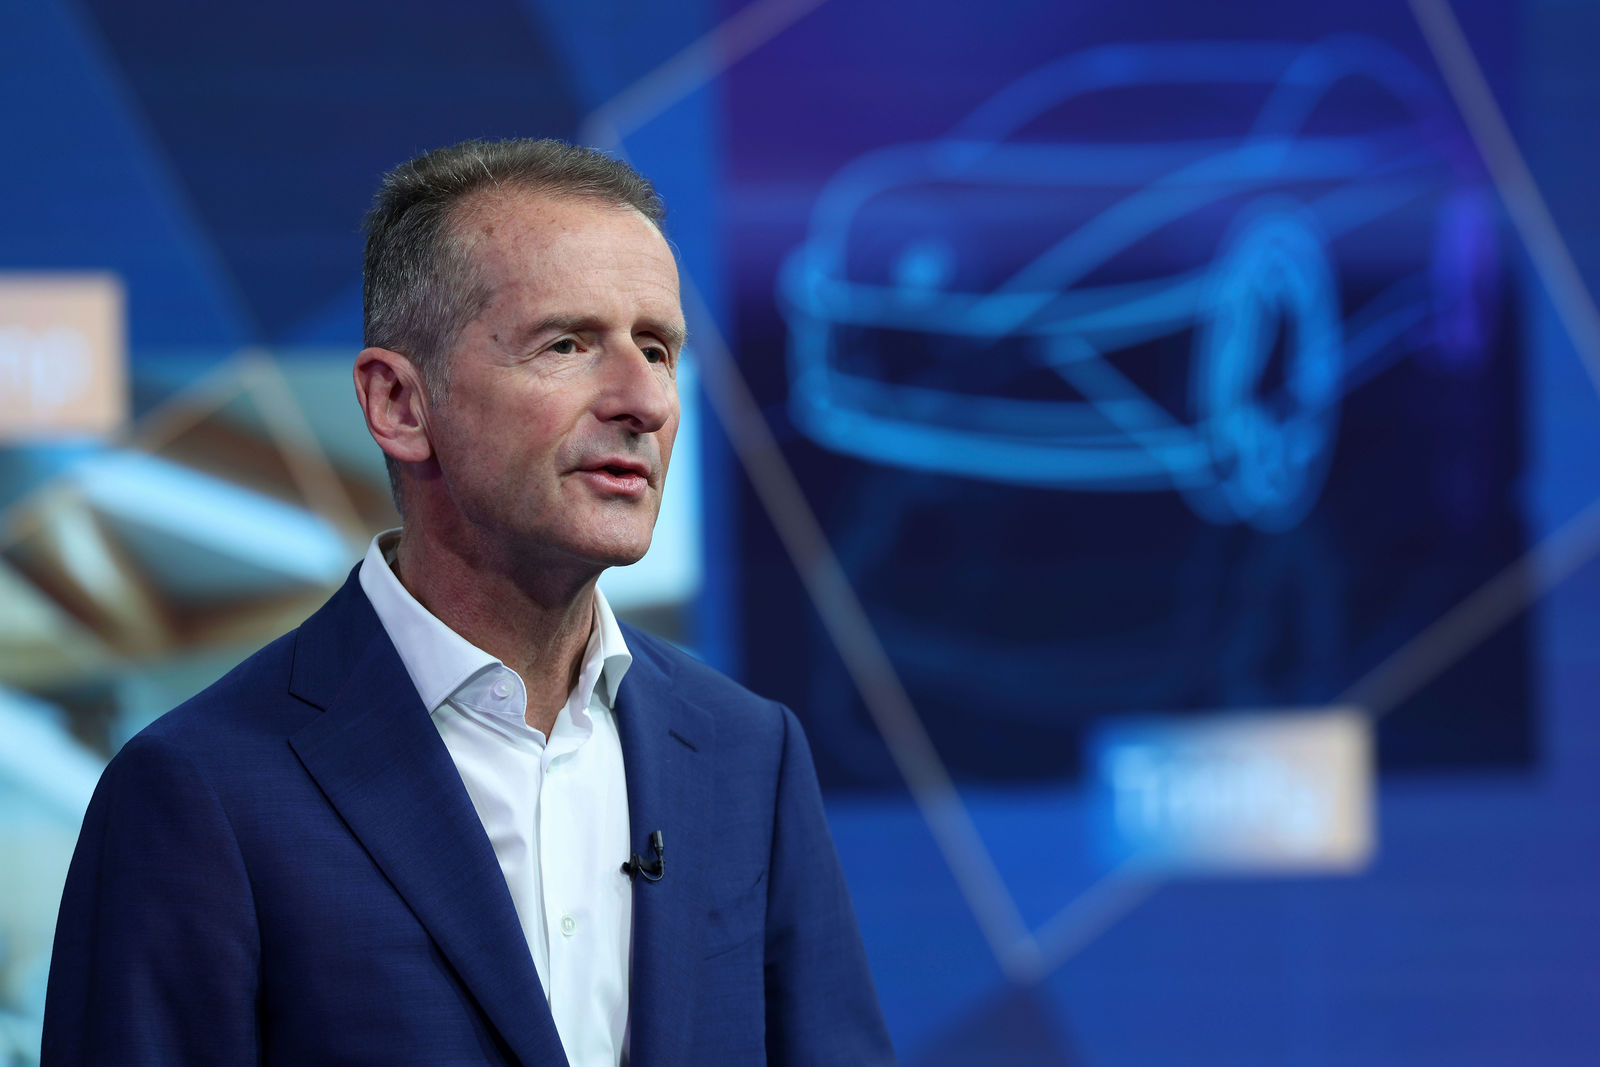 Volkswagen Group annual media conference 2022